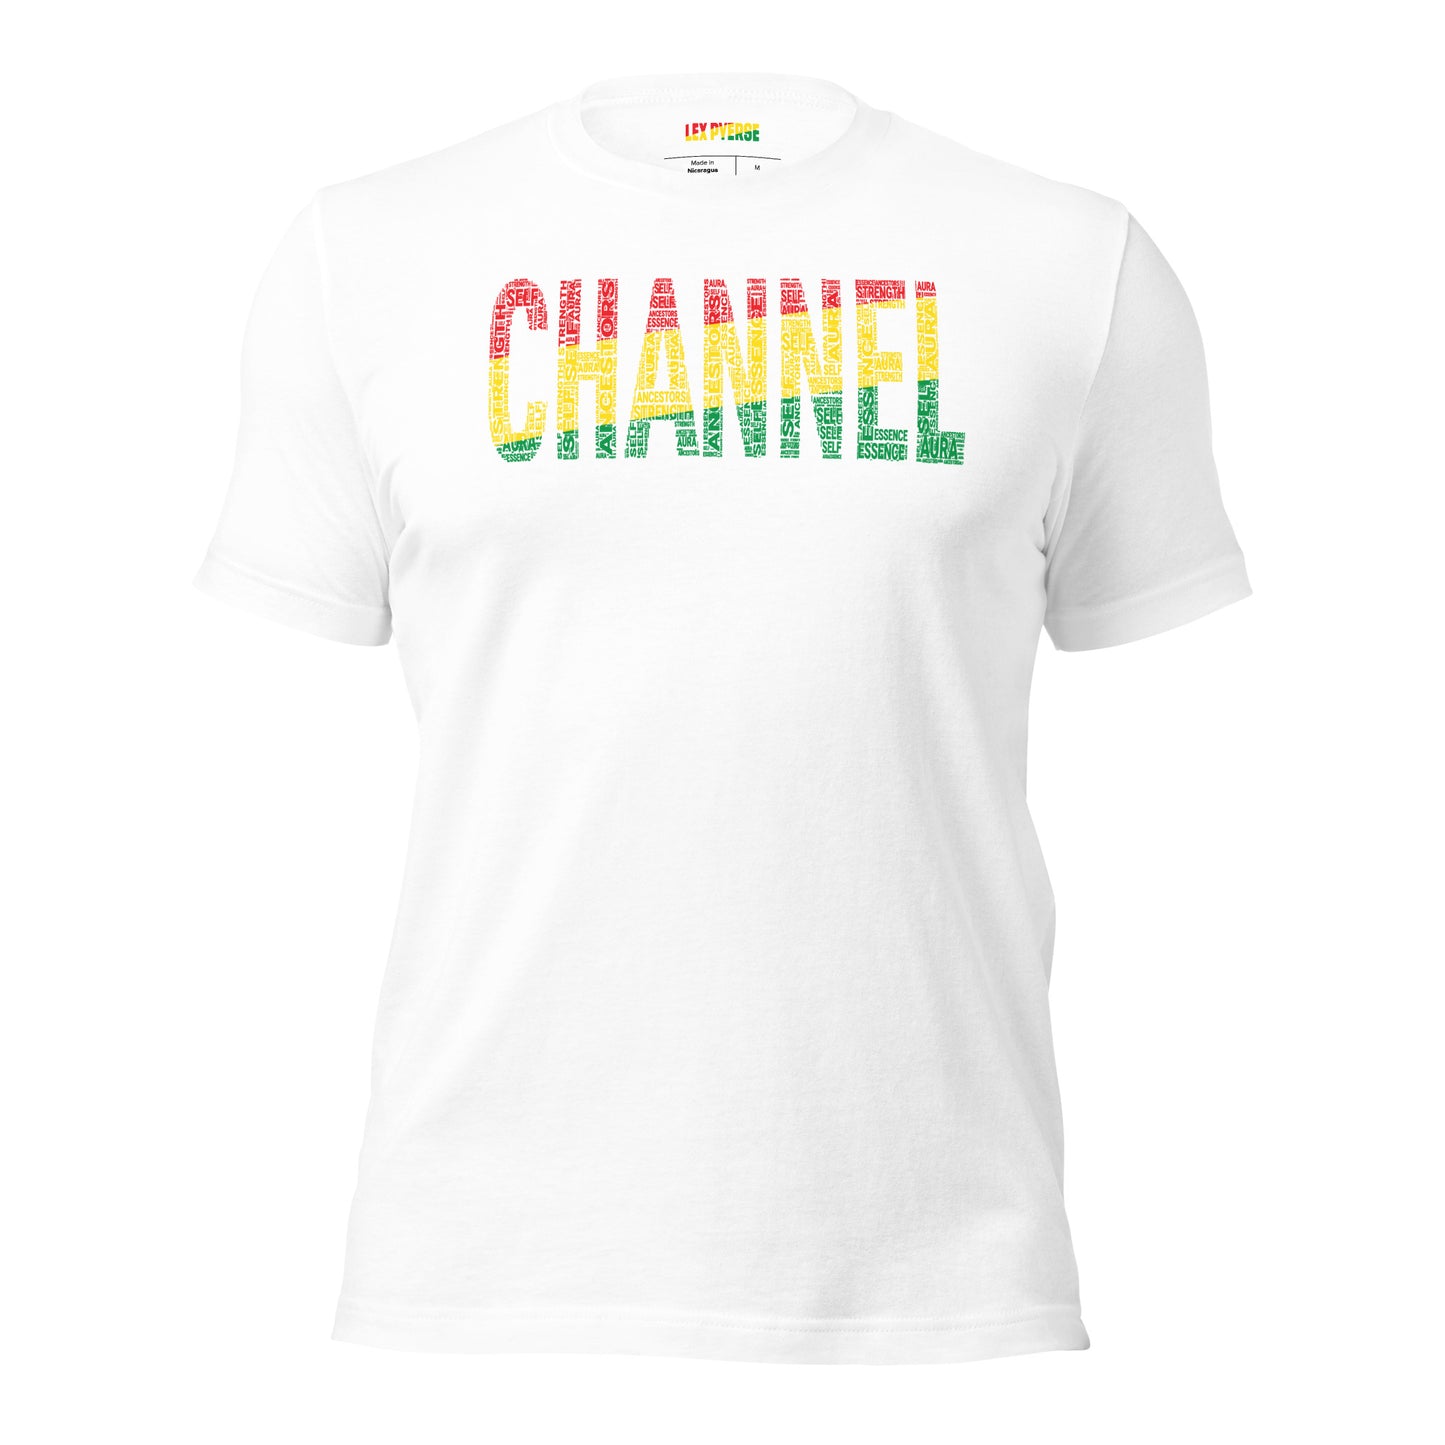 "CHANNEL" Pan-African Colored Short-Sleeve Unisex T-Shirt